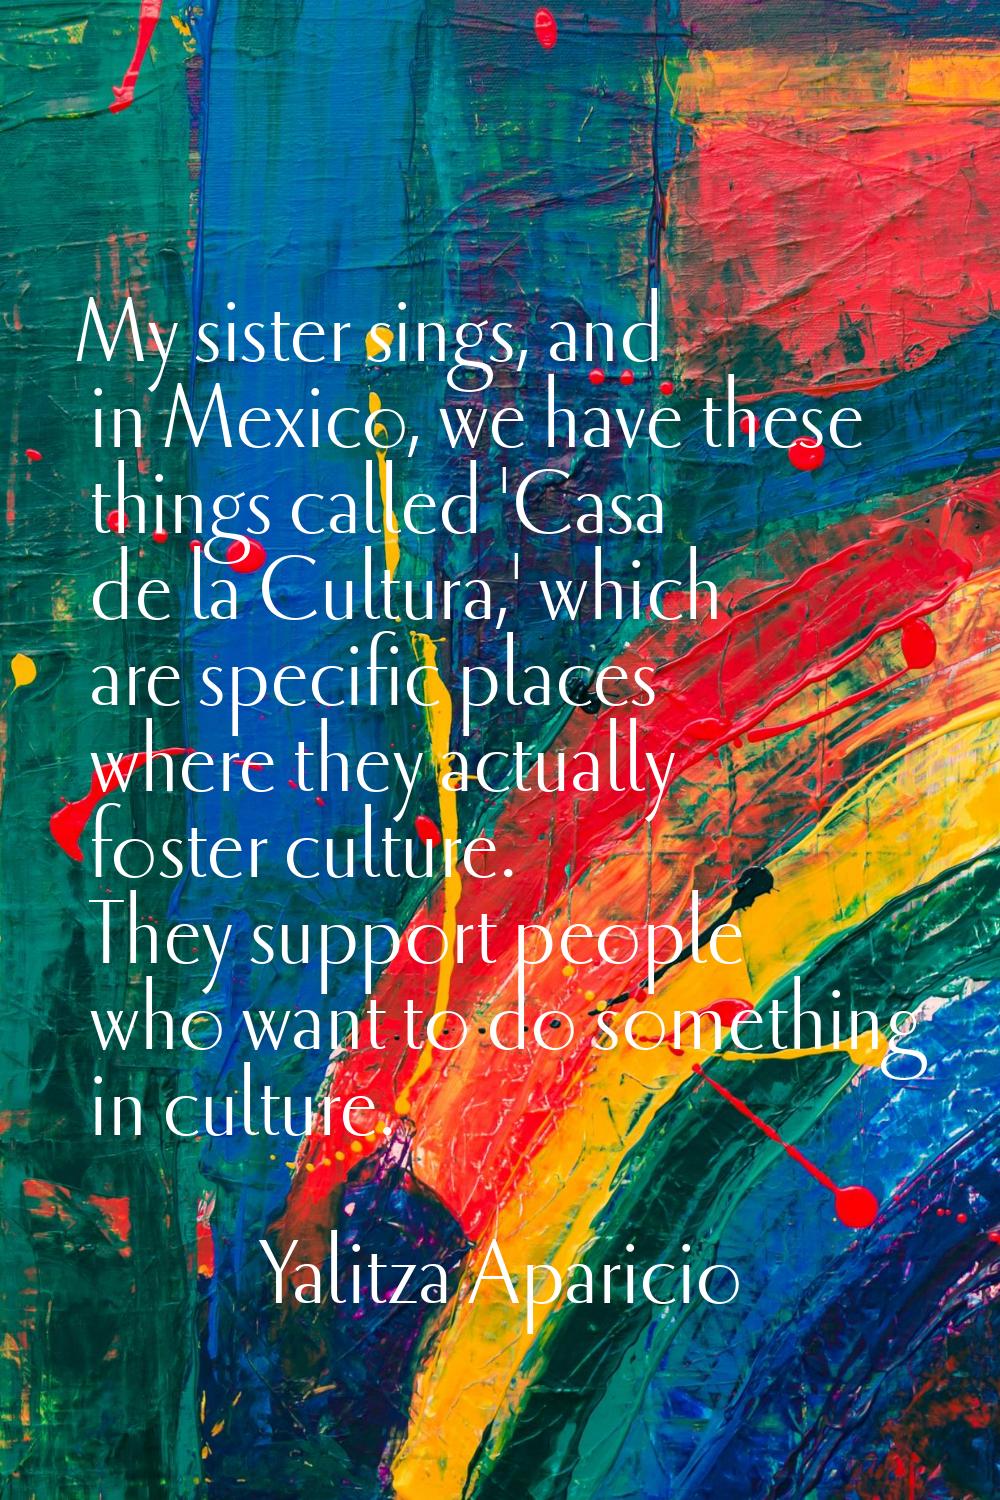 My sister sings, and in Mexico, we have these things called 'Casa de la Cultura,' which are specifi